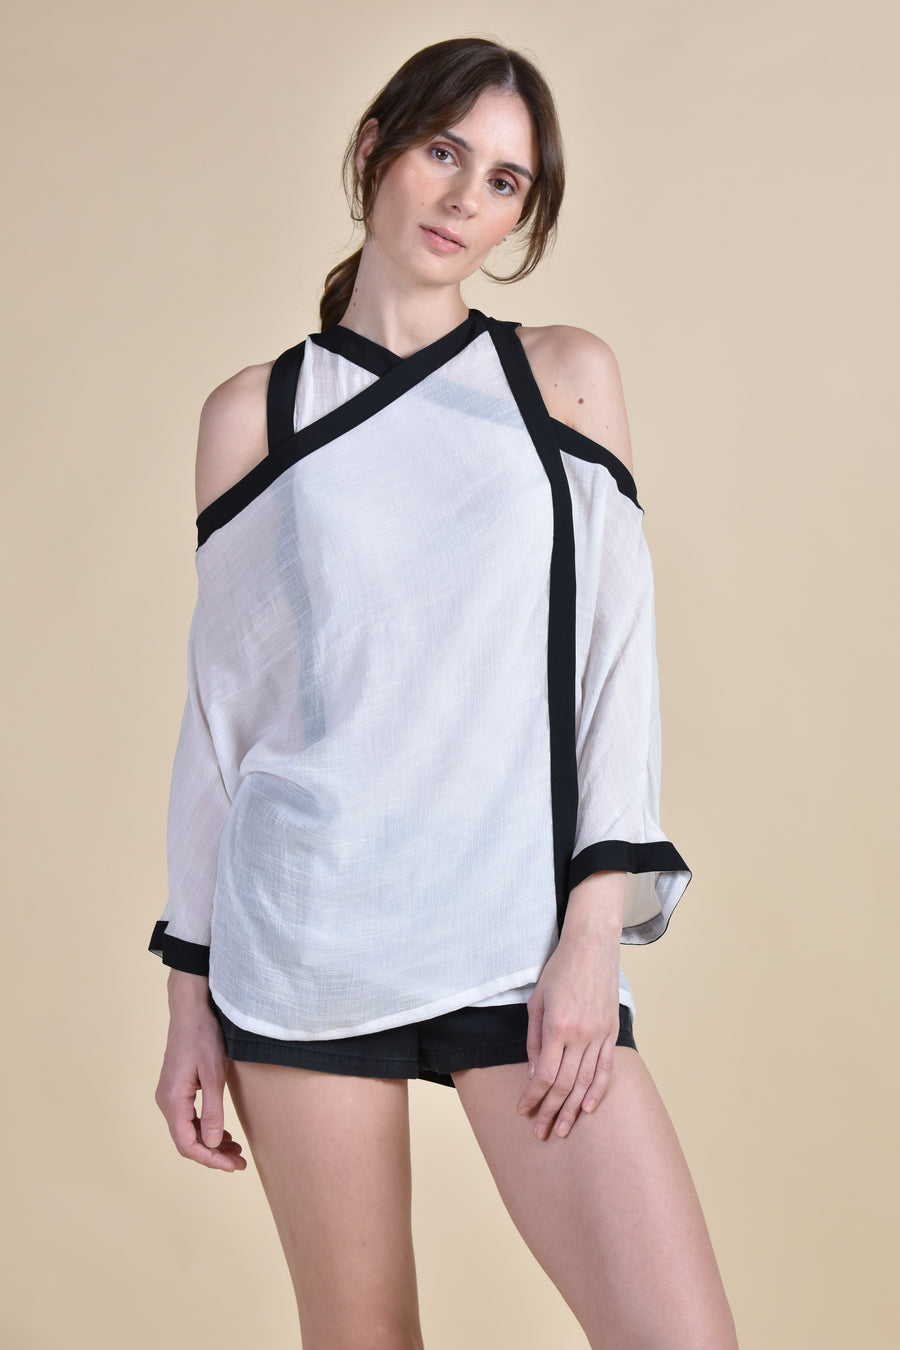 NYX Cold Shoulder Top (White with Black Trim)